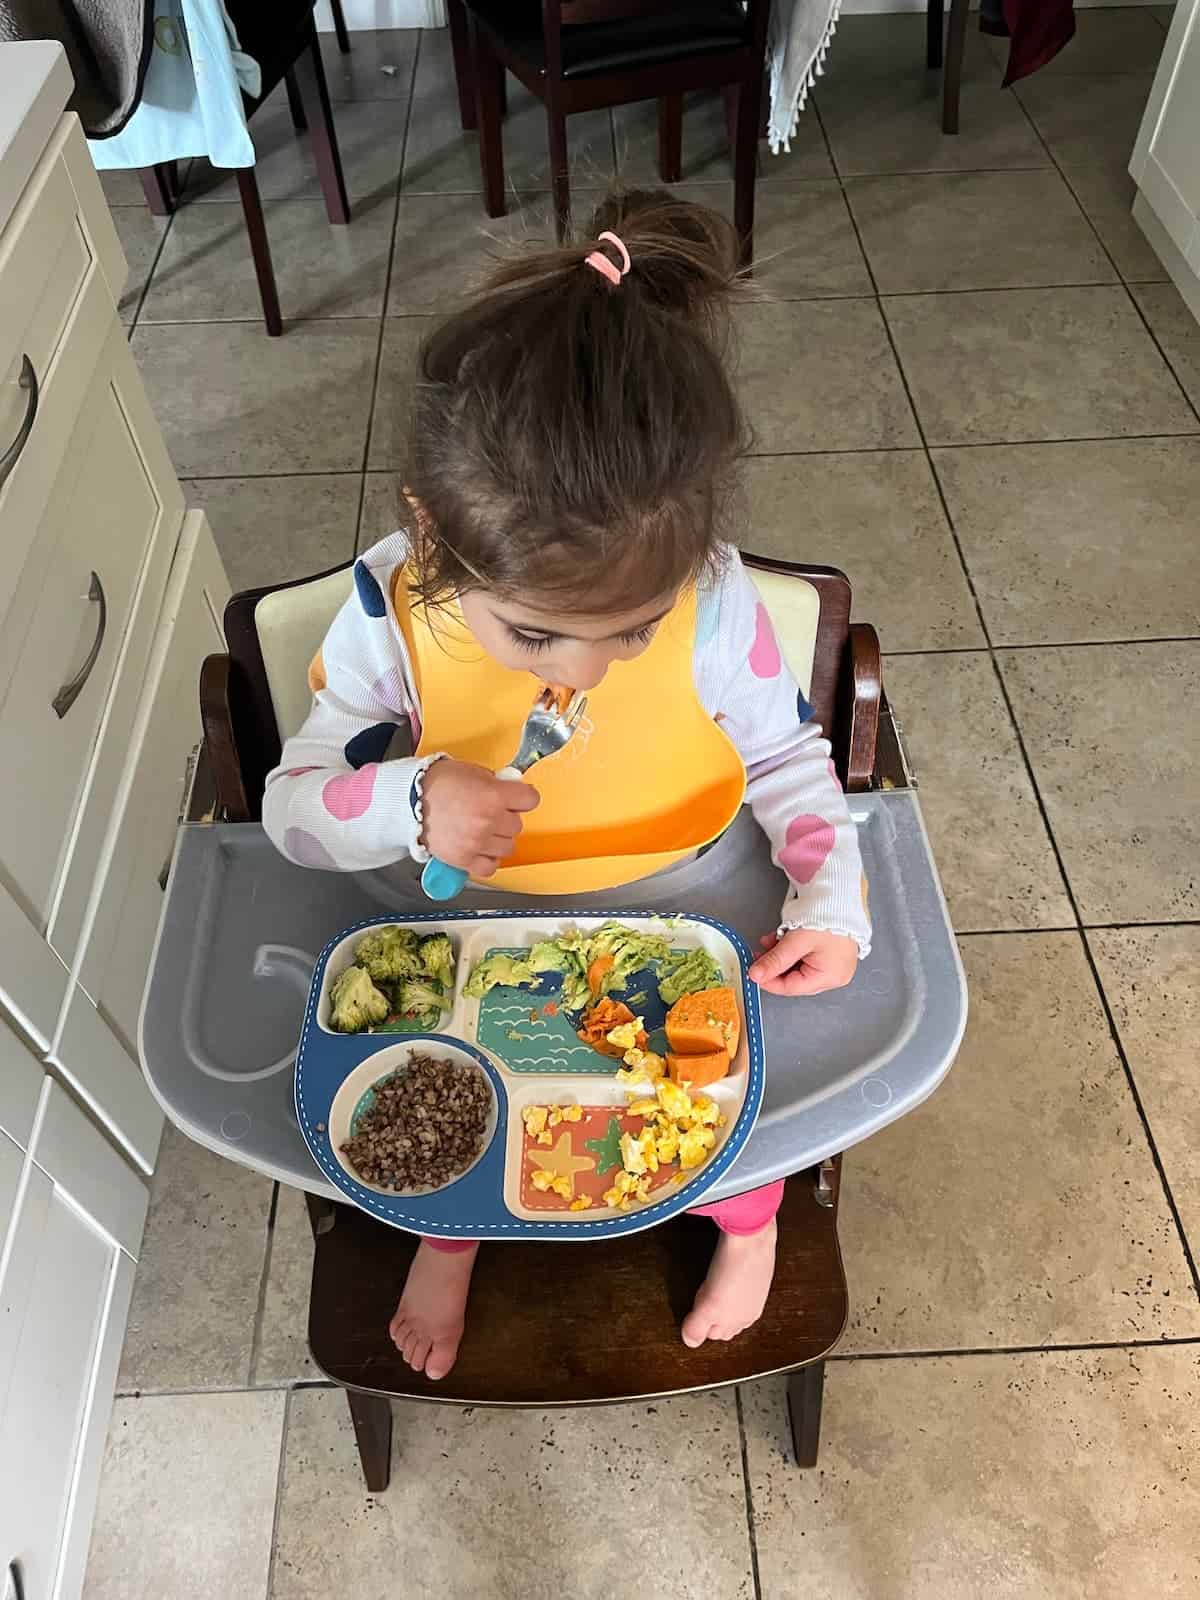 https://thrivinginparenting.com/wp-content/uploads/2021/04/best-high-chair-for-baby-led-weaning-2.jpg